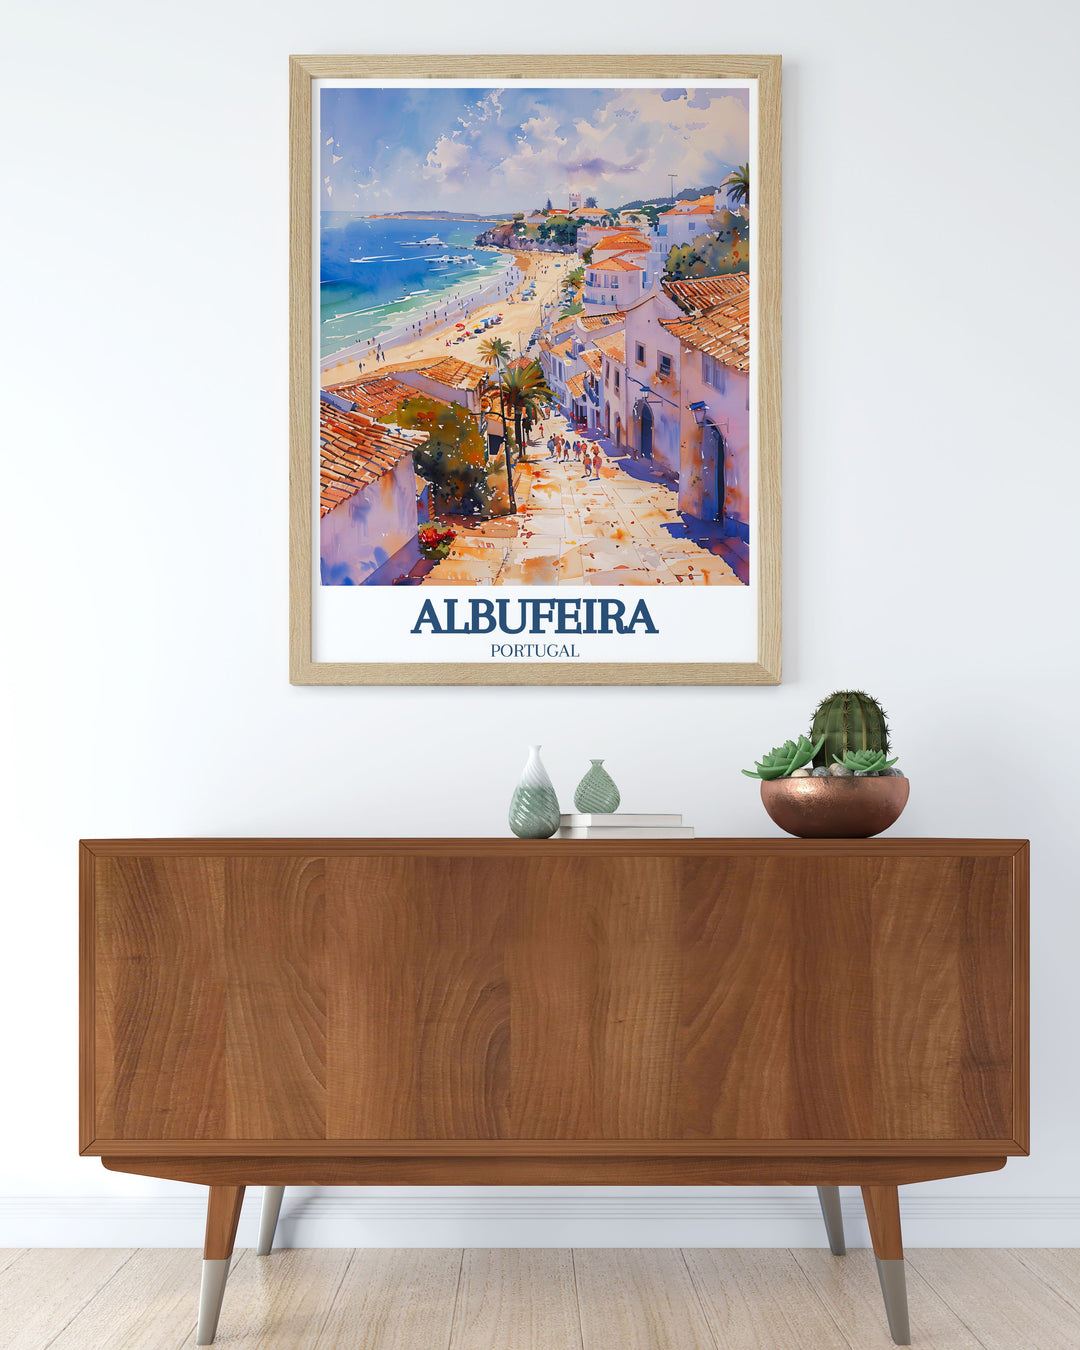 Albufeira wall art featuring the stunning Praia da Oura, designed to bring a sense of peace and coastal beauty to your home decor.